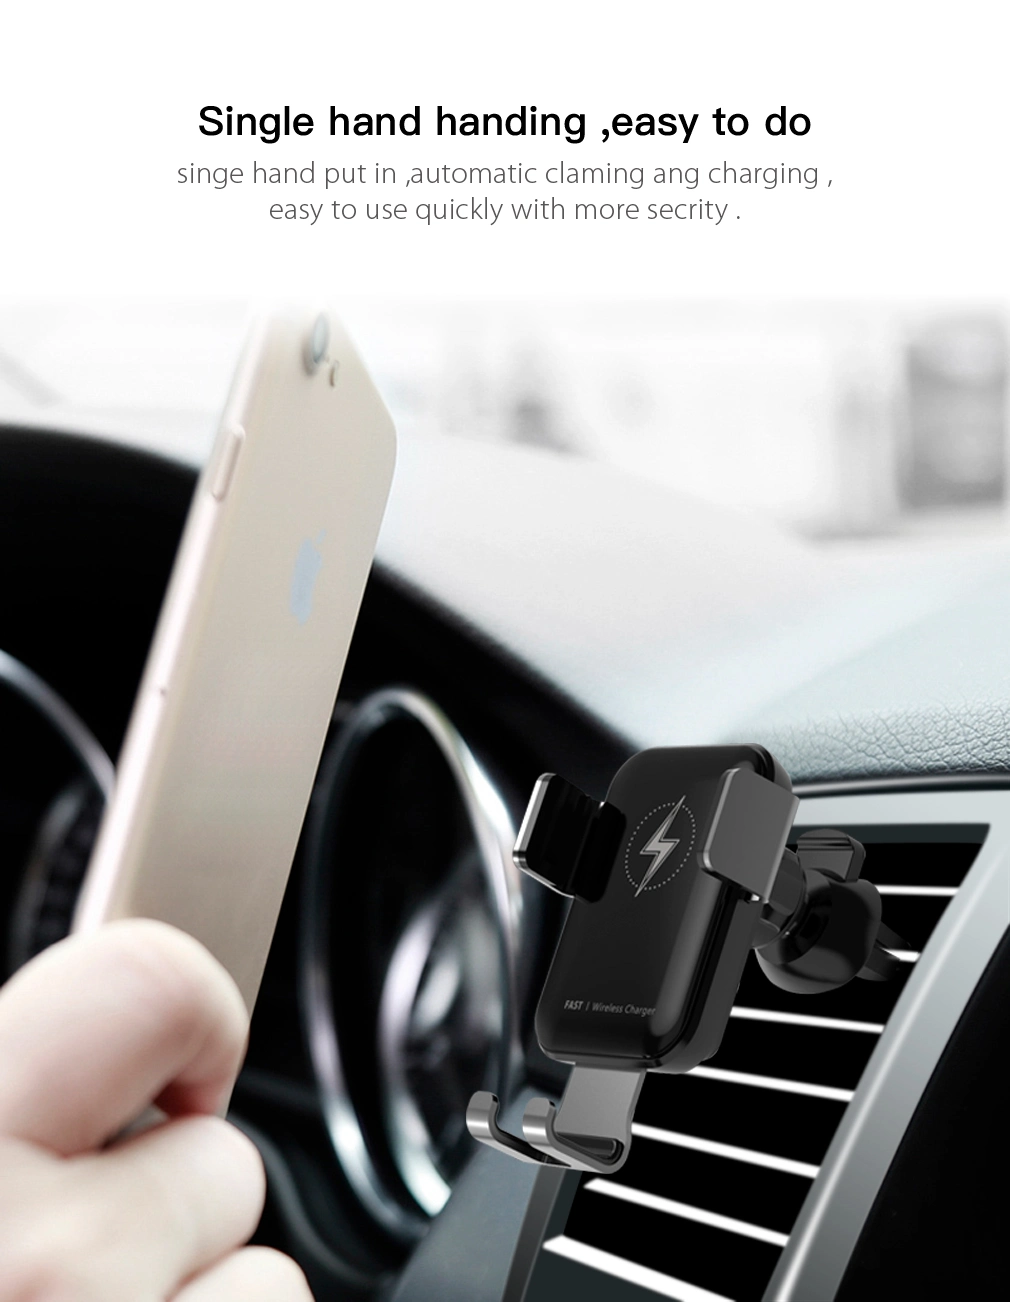 Portable Best Wireless Charger Car with Auto Clamping USB Car Charger, Qi Wireless Charger 15W Car Charger, Wireless Car Charger